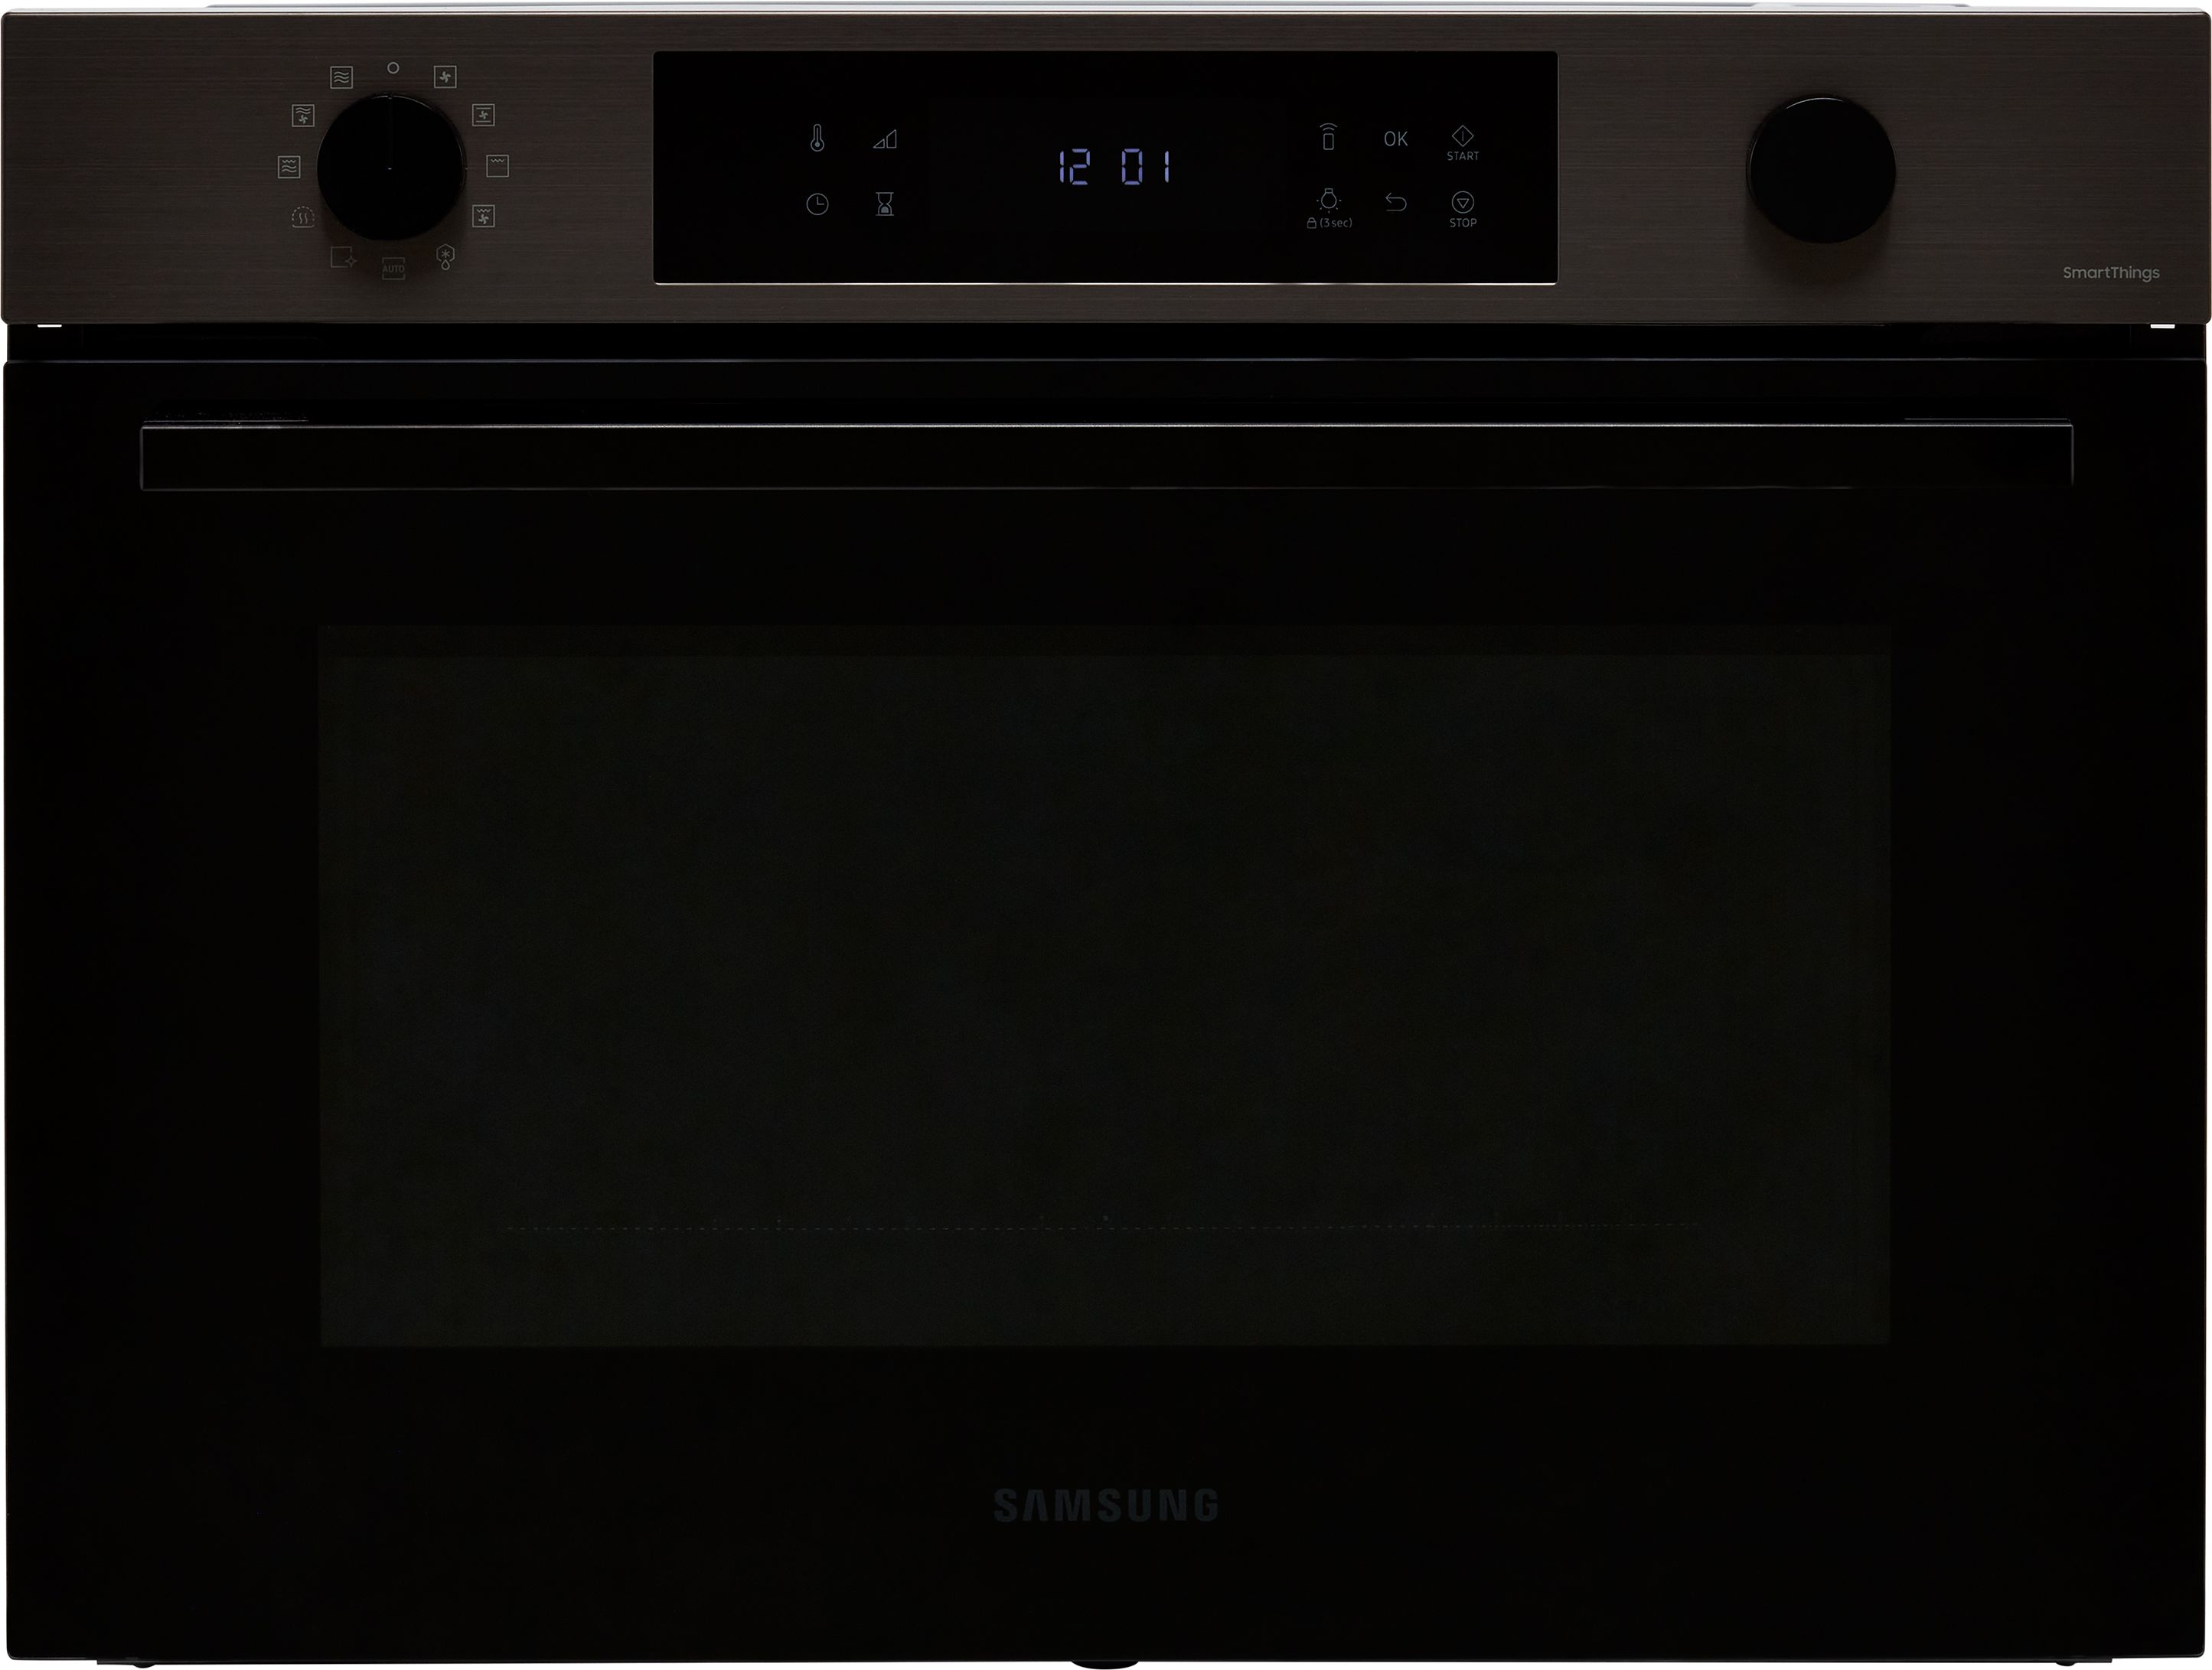 Samsung Series 4 NQ5B4553FBB Wifi Connected Built In Compact Electric Single Oven with Microwave Function - Black / Stainless Steel, Black